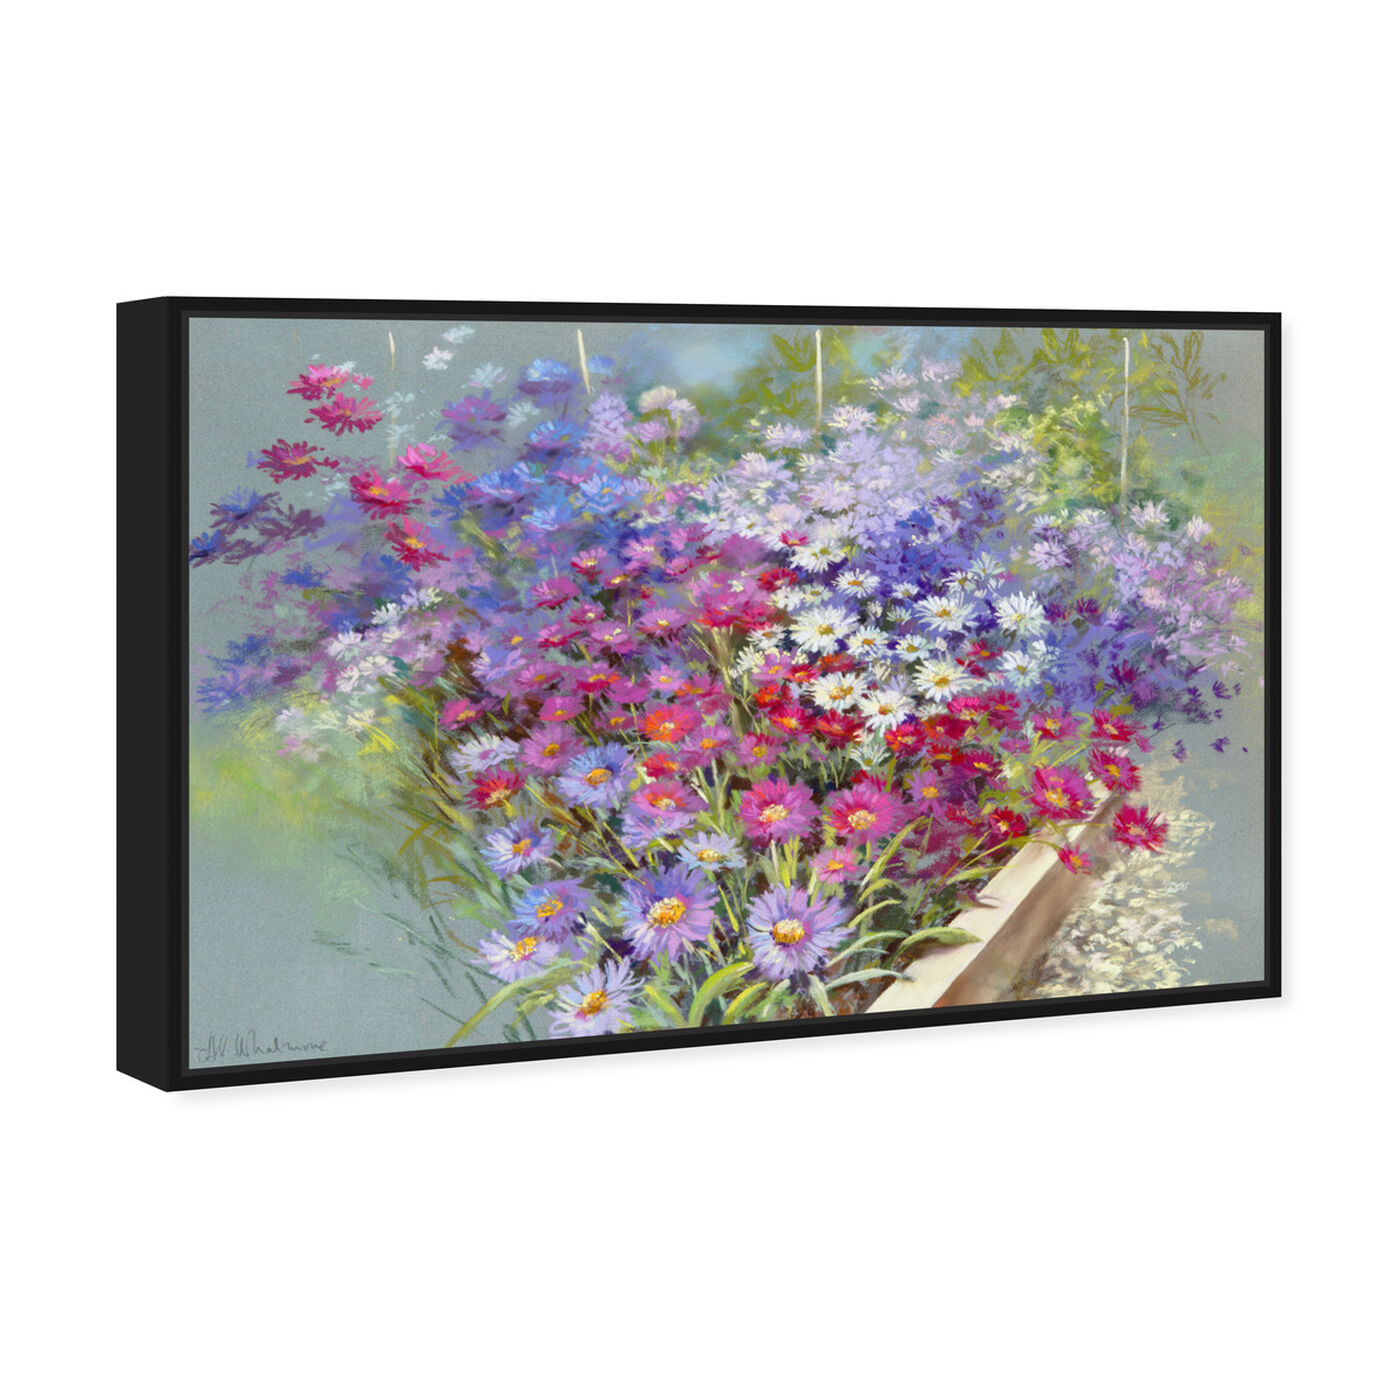 Angled view of Sai - Shades of Lavander 3NW3403 featuring floral and botanical and florals art.